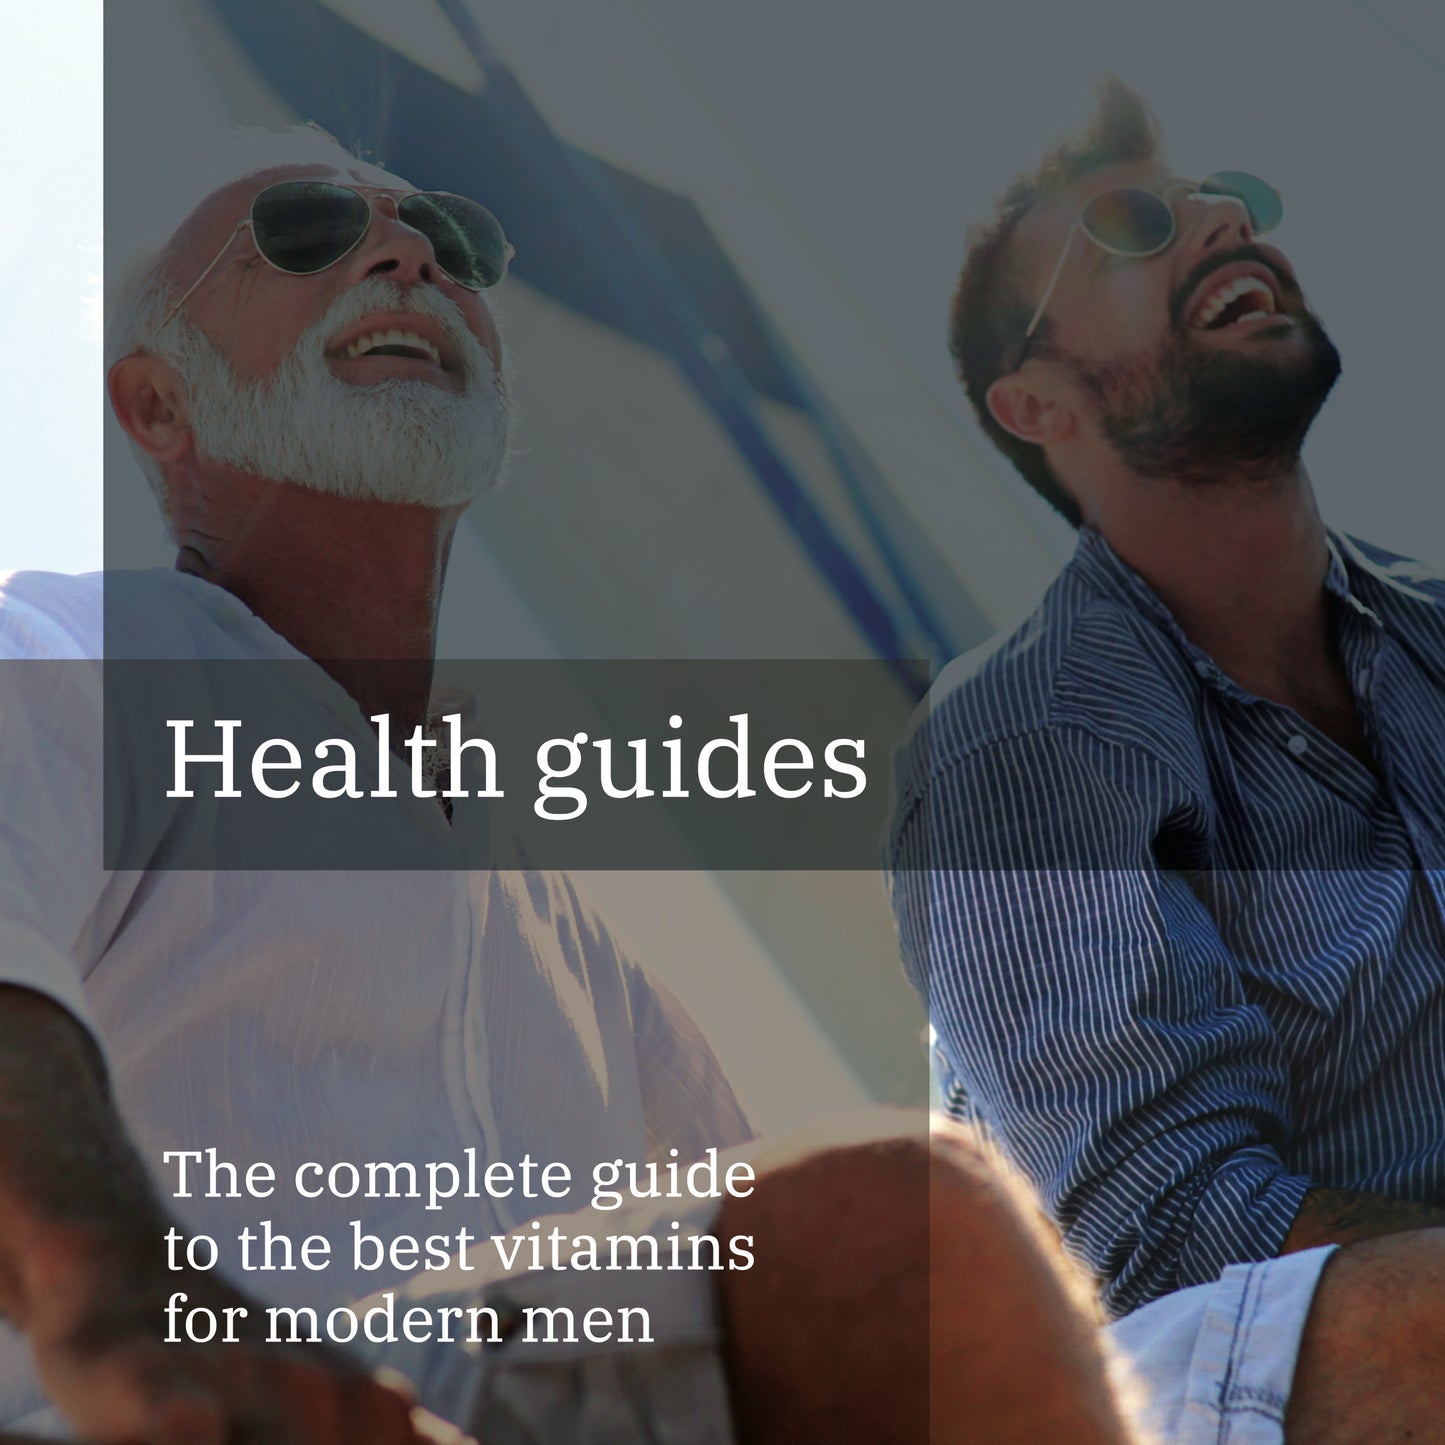 The complete guide to the best vitamins for modern men